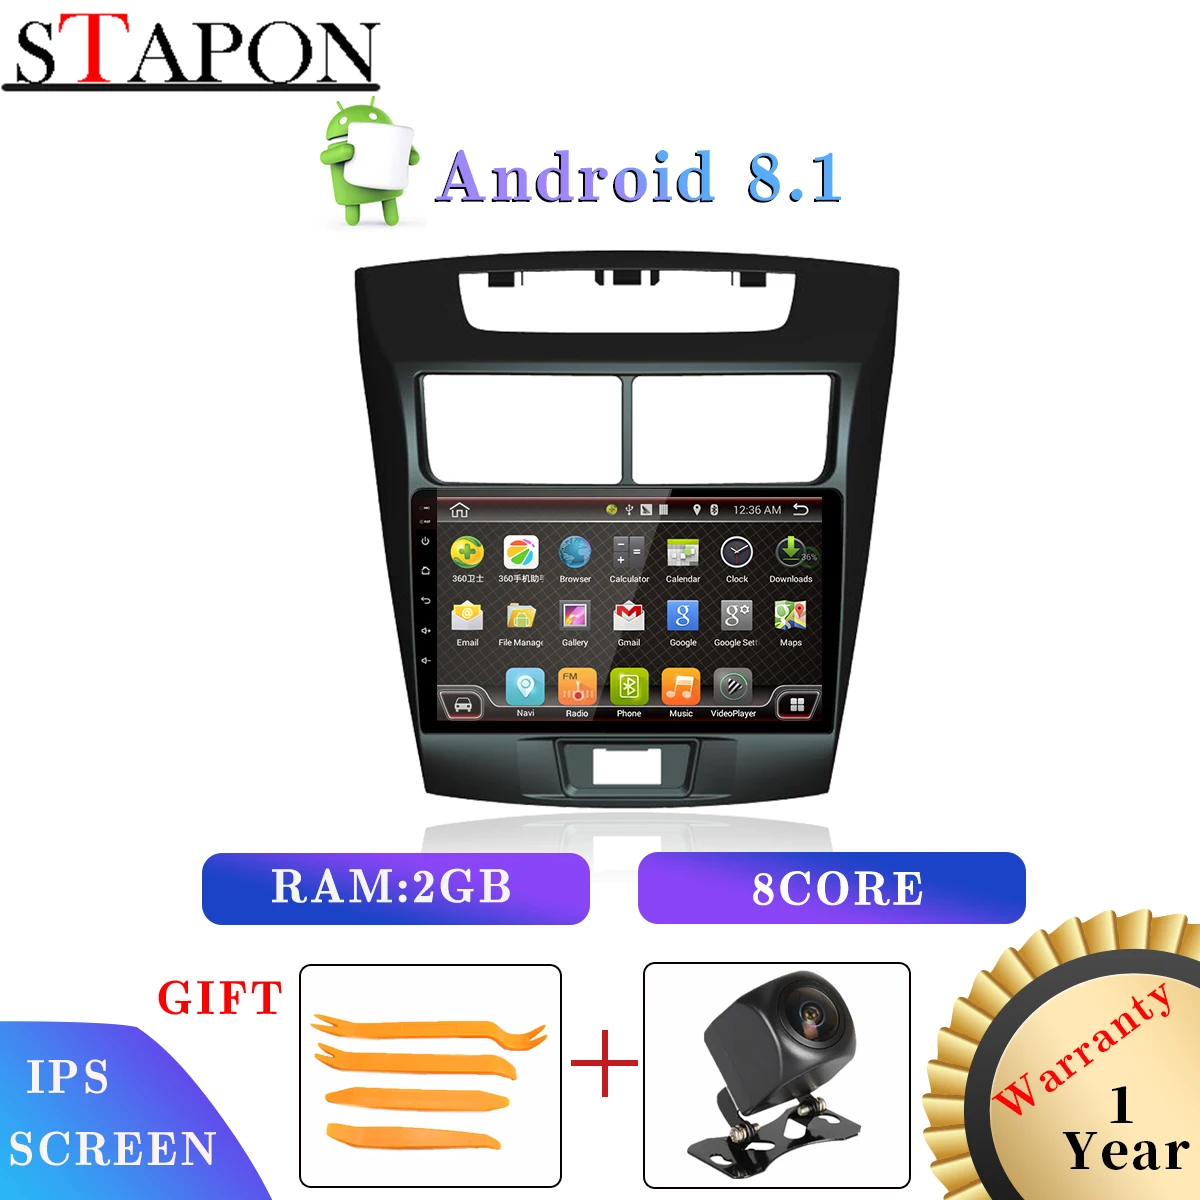 

STAPON 9inch for Toyota avanza Android 8.1 2GB RAM OCTA CORE car DVD navigation player with RDS FM AM Wifi Bluetooth